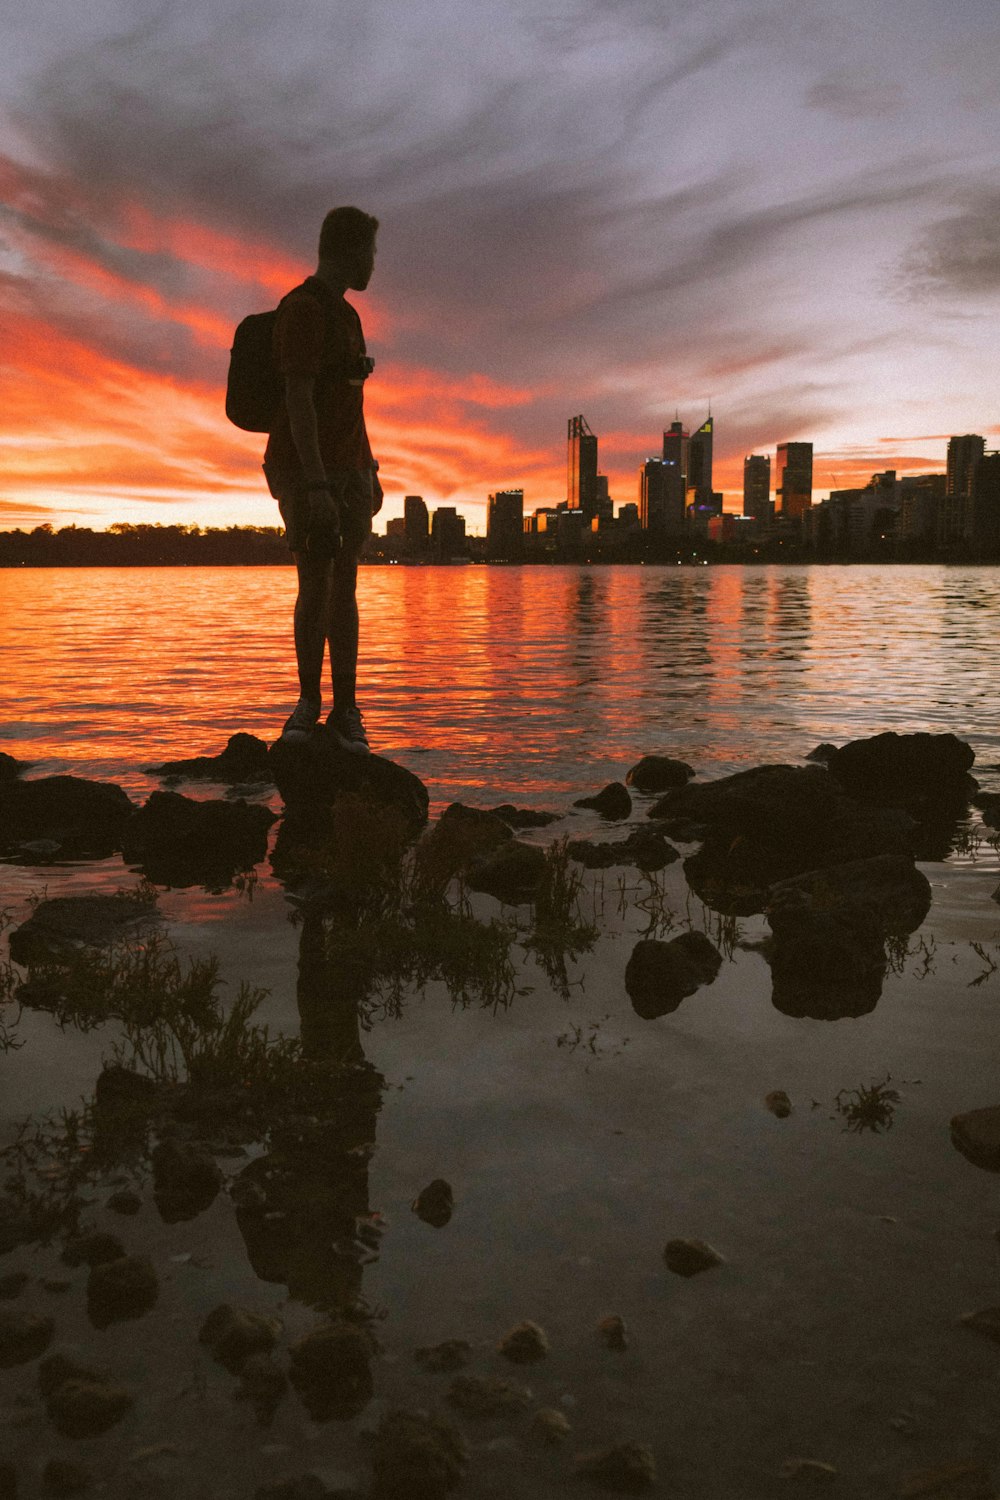 silhouette of man standing on rock near body of water during sunset